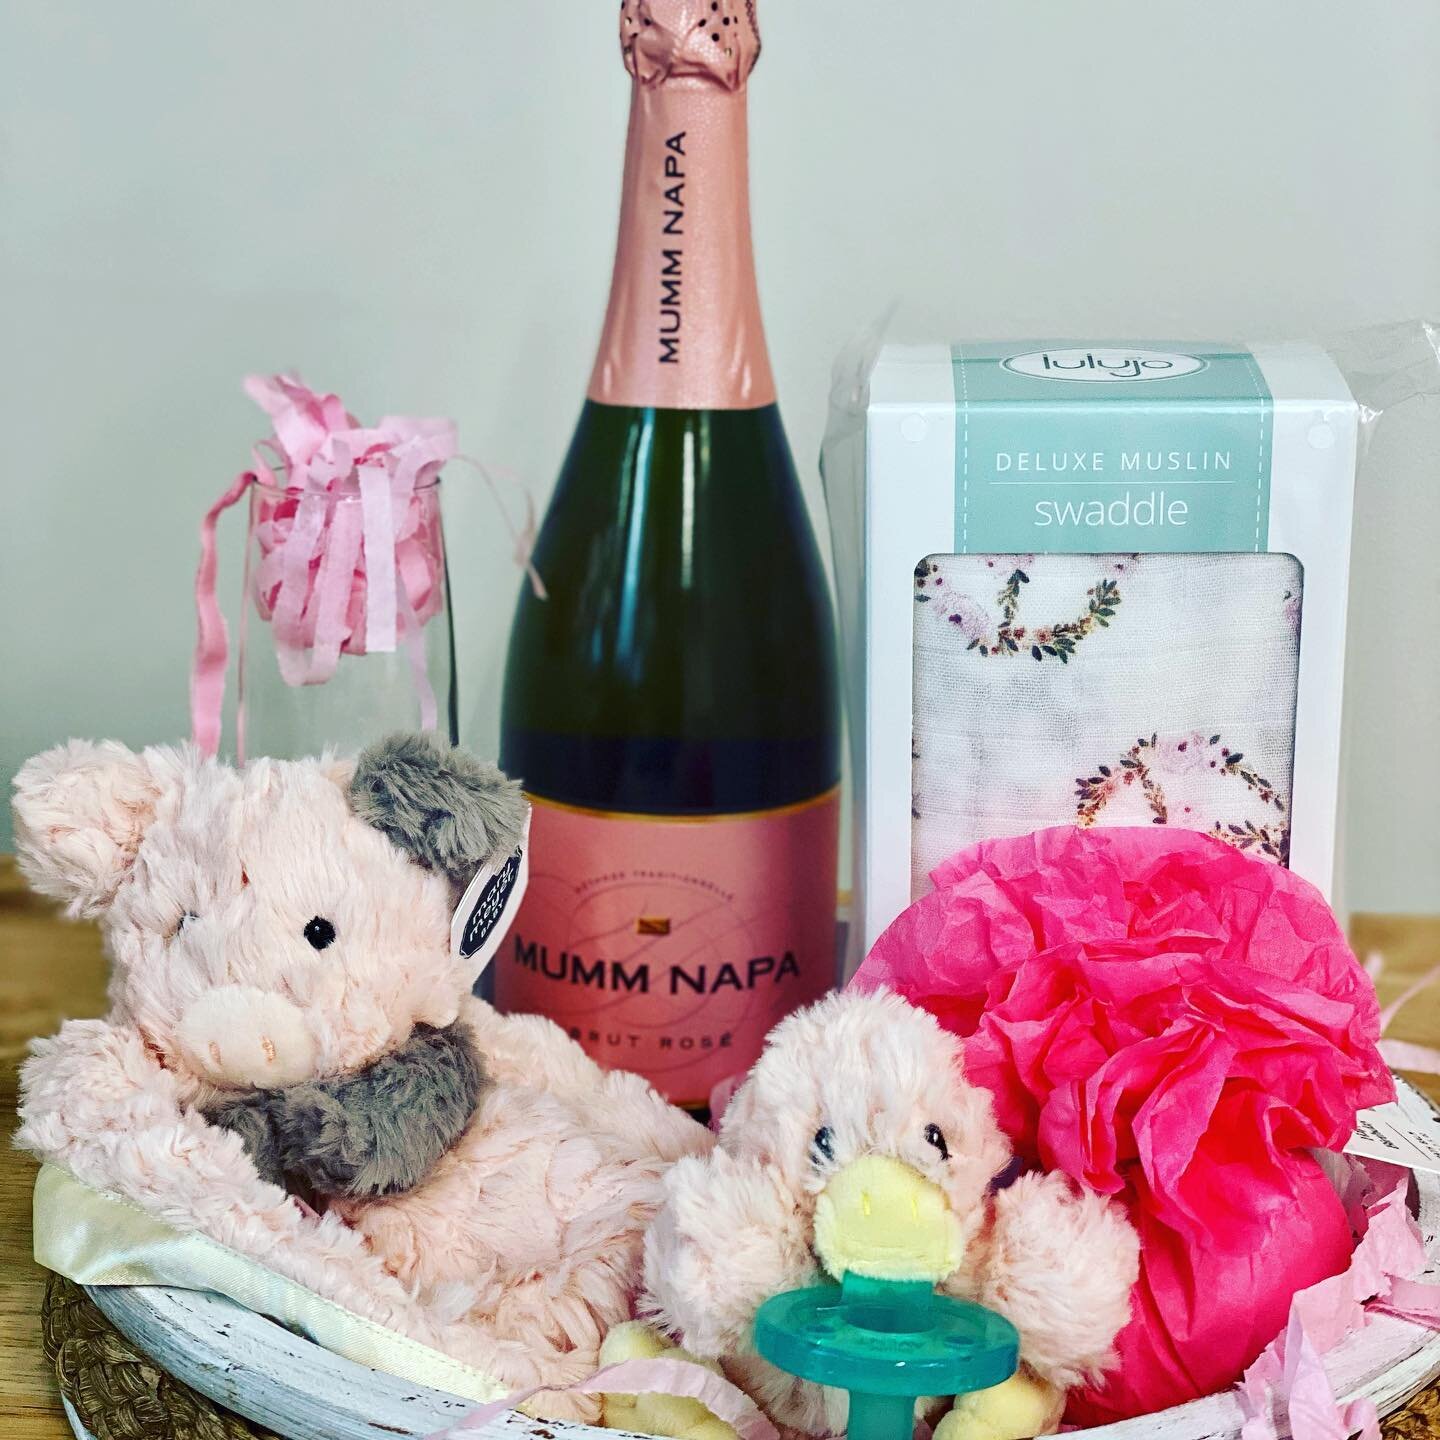 &ldquo;Sugar and spice and everything nice&rdquo; this cute little gift is headed out to a sweet new Mom and her new baby girl 💗💗💗💗💗💗💗🎀🎀🎀🎀. 

DM us for any of your  baby gift needs !!!💗💙